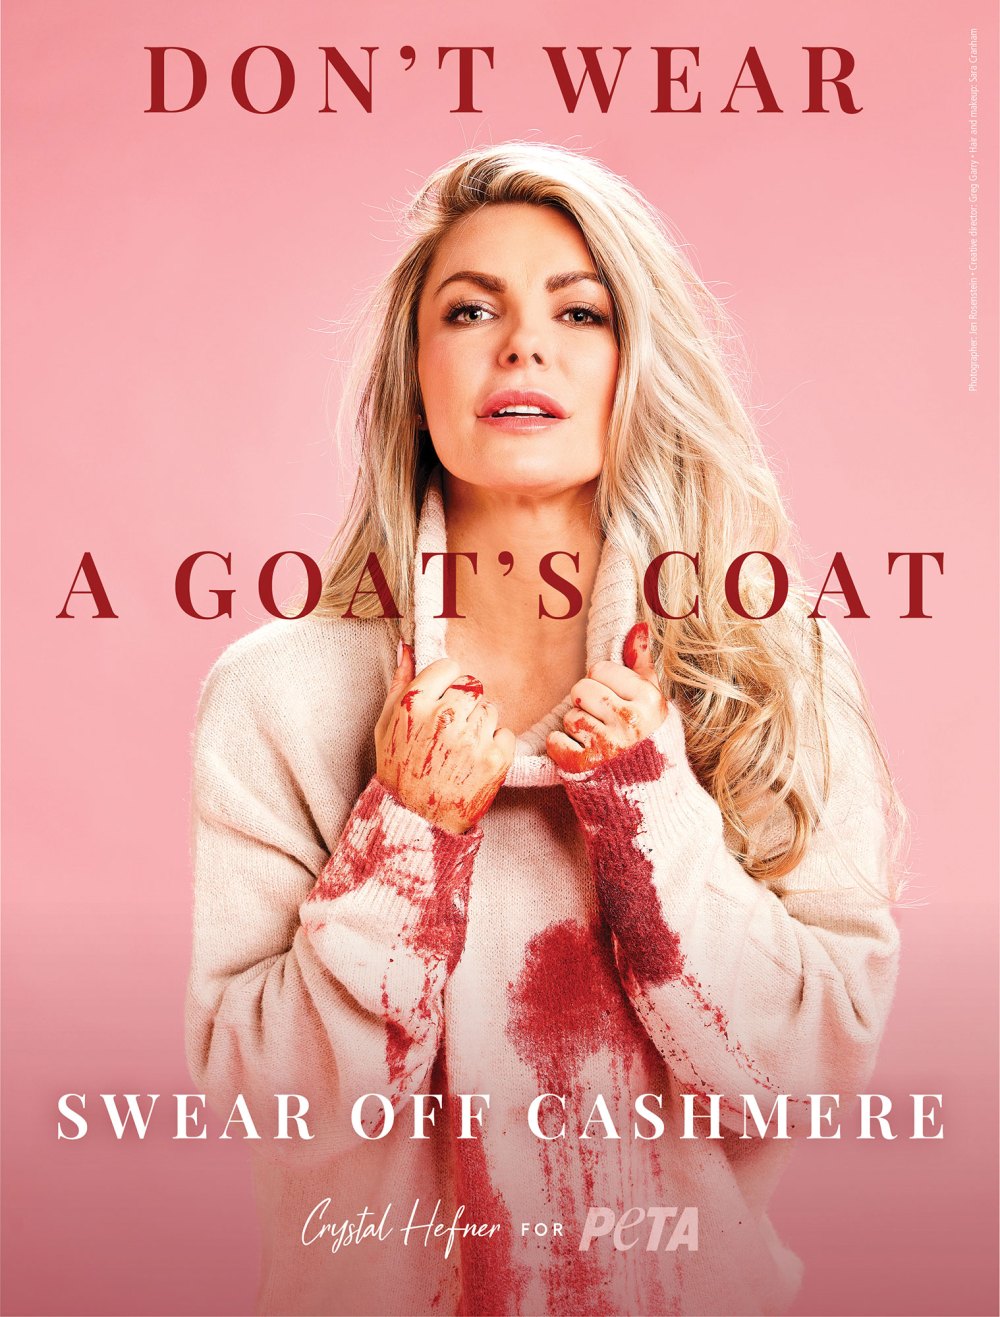 Crystal Hefner Teams Up With PETA for Campaign Against the Cruelty of Cashmere